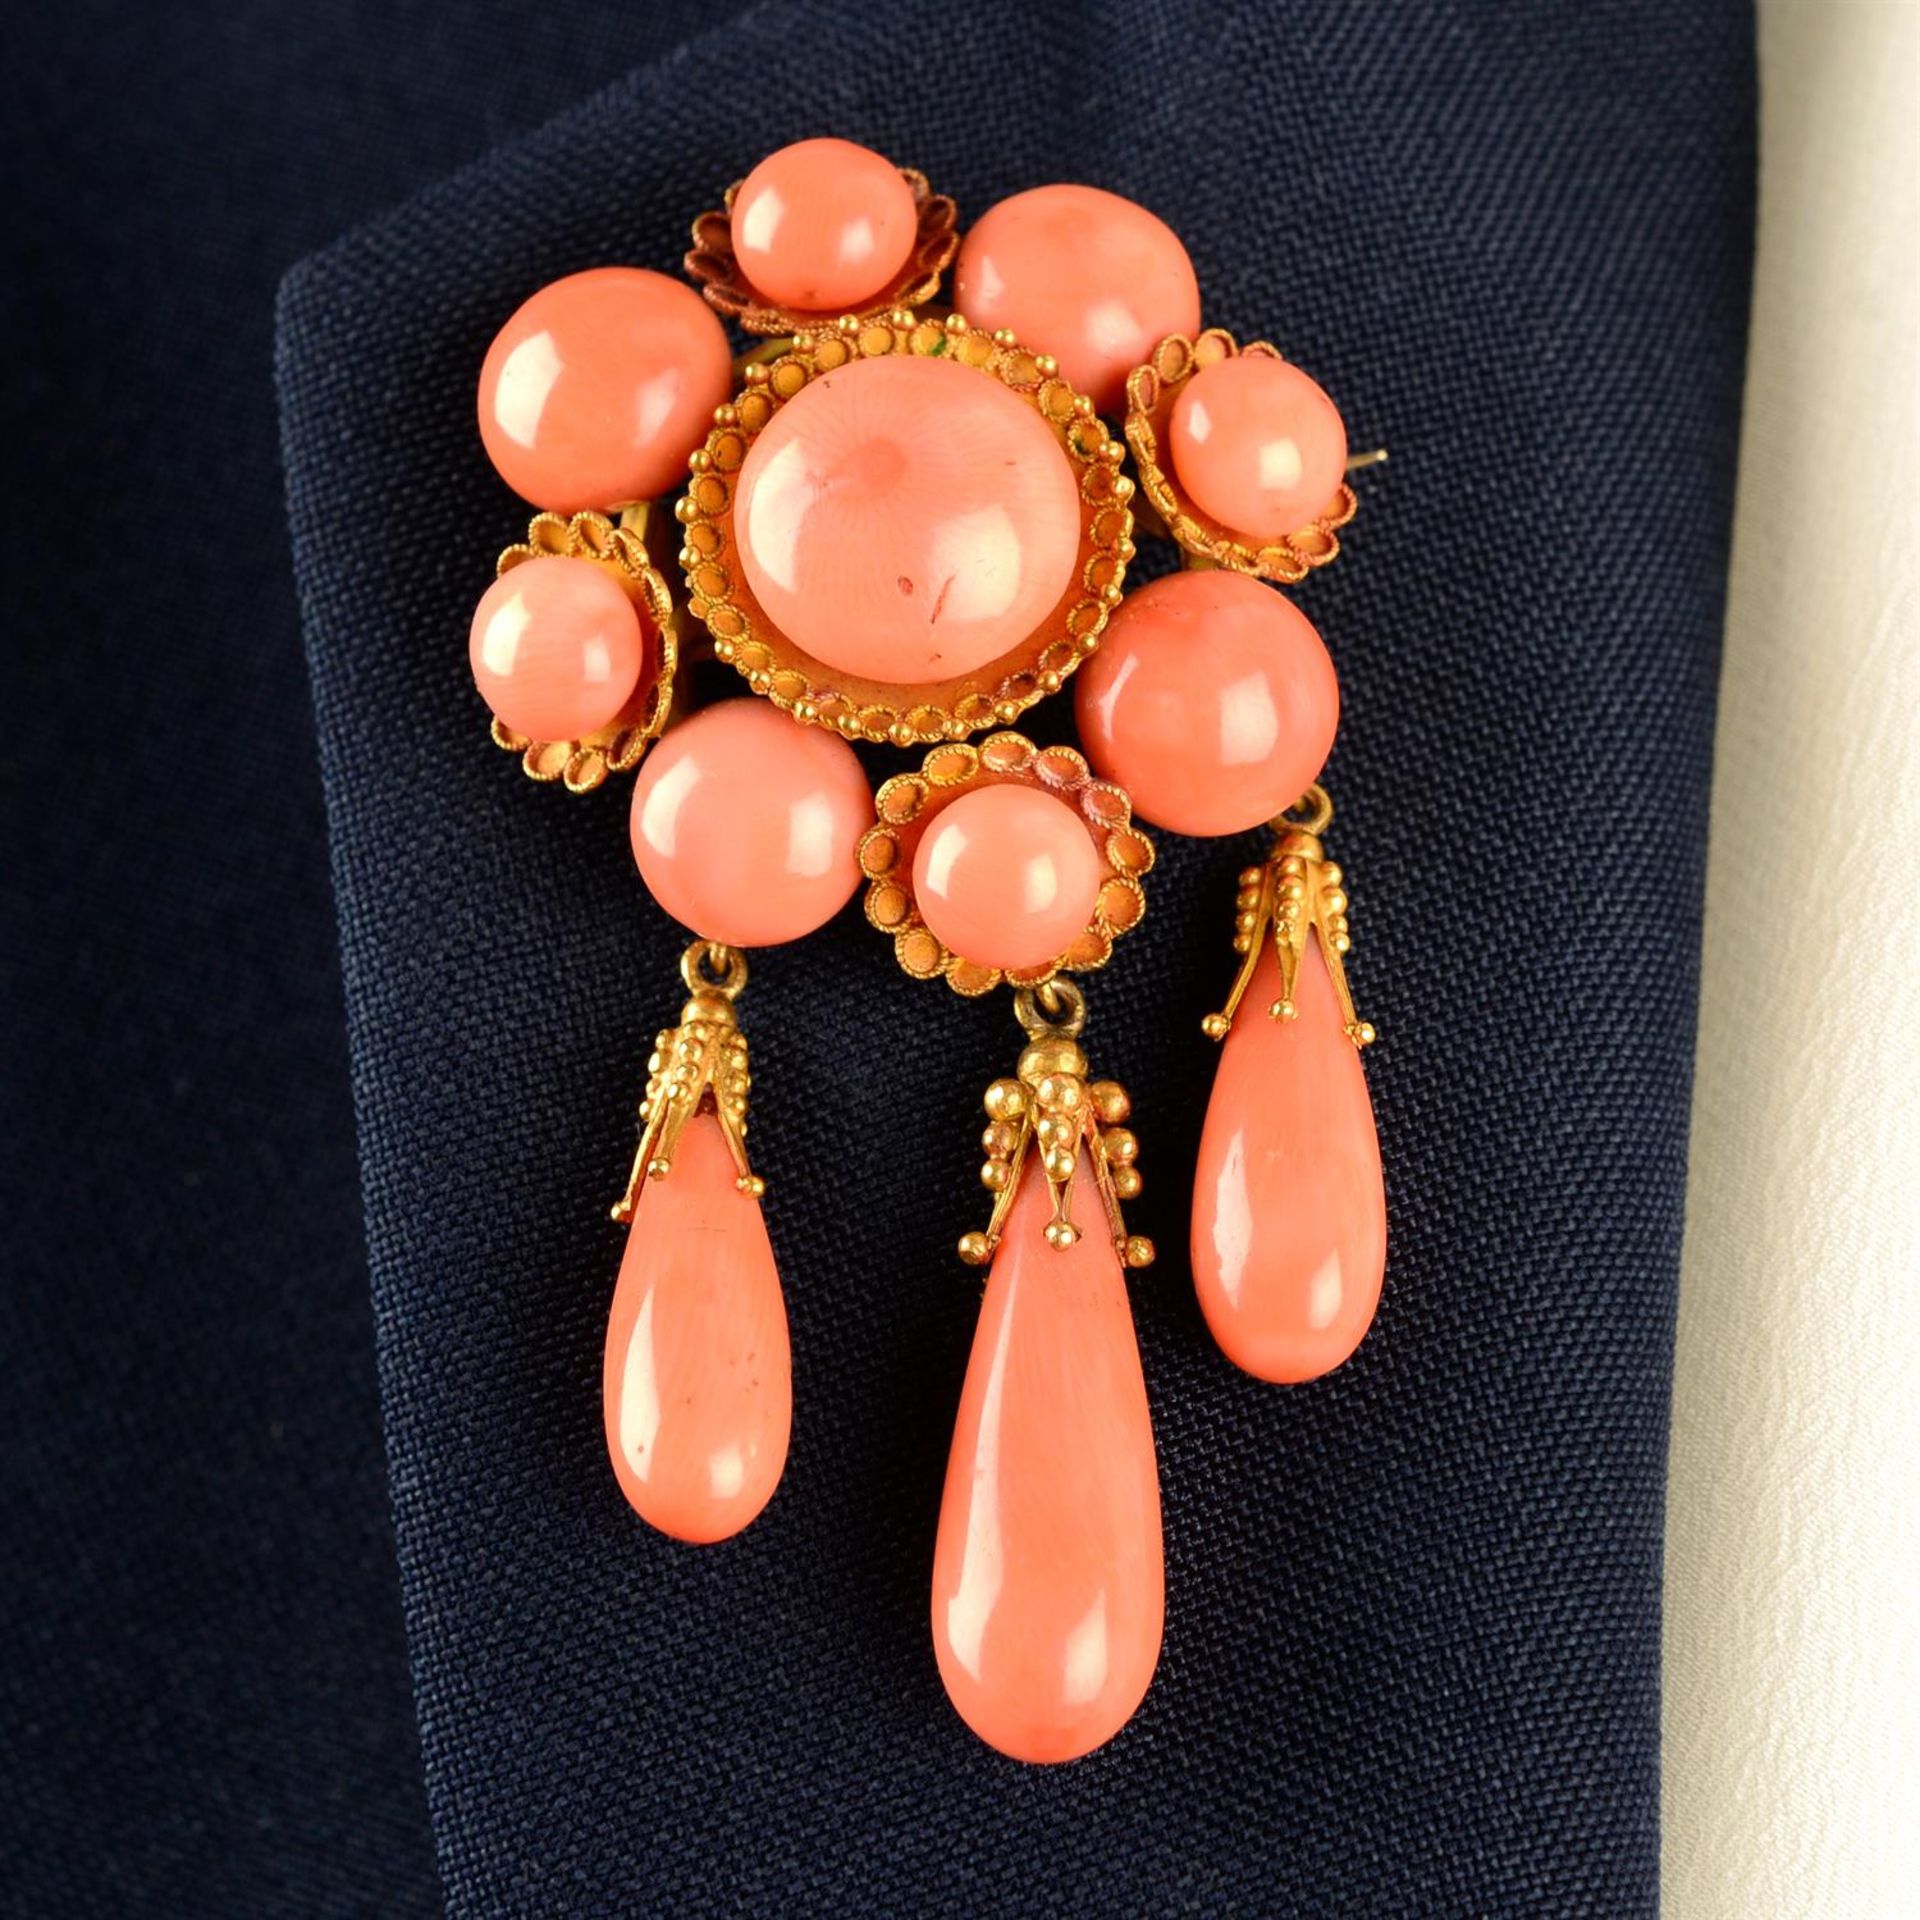 A mid to late 19th century gold coral brooch, with drop fringe, by Luigi Casalta.